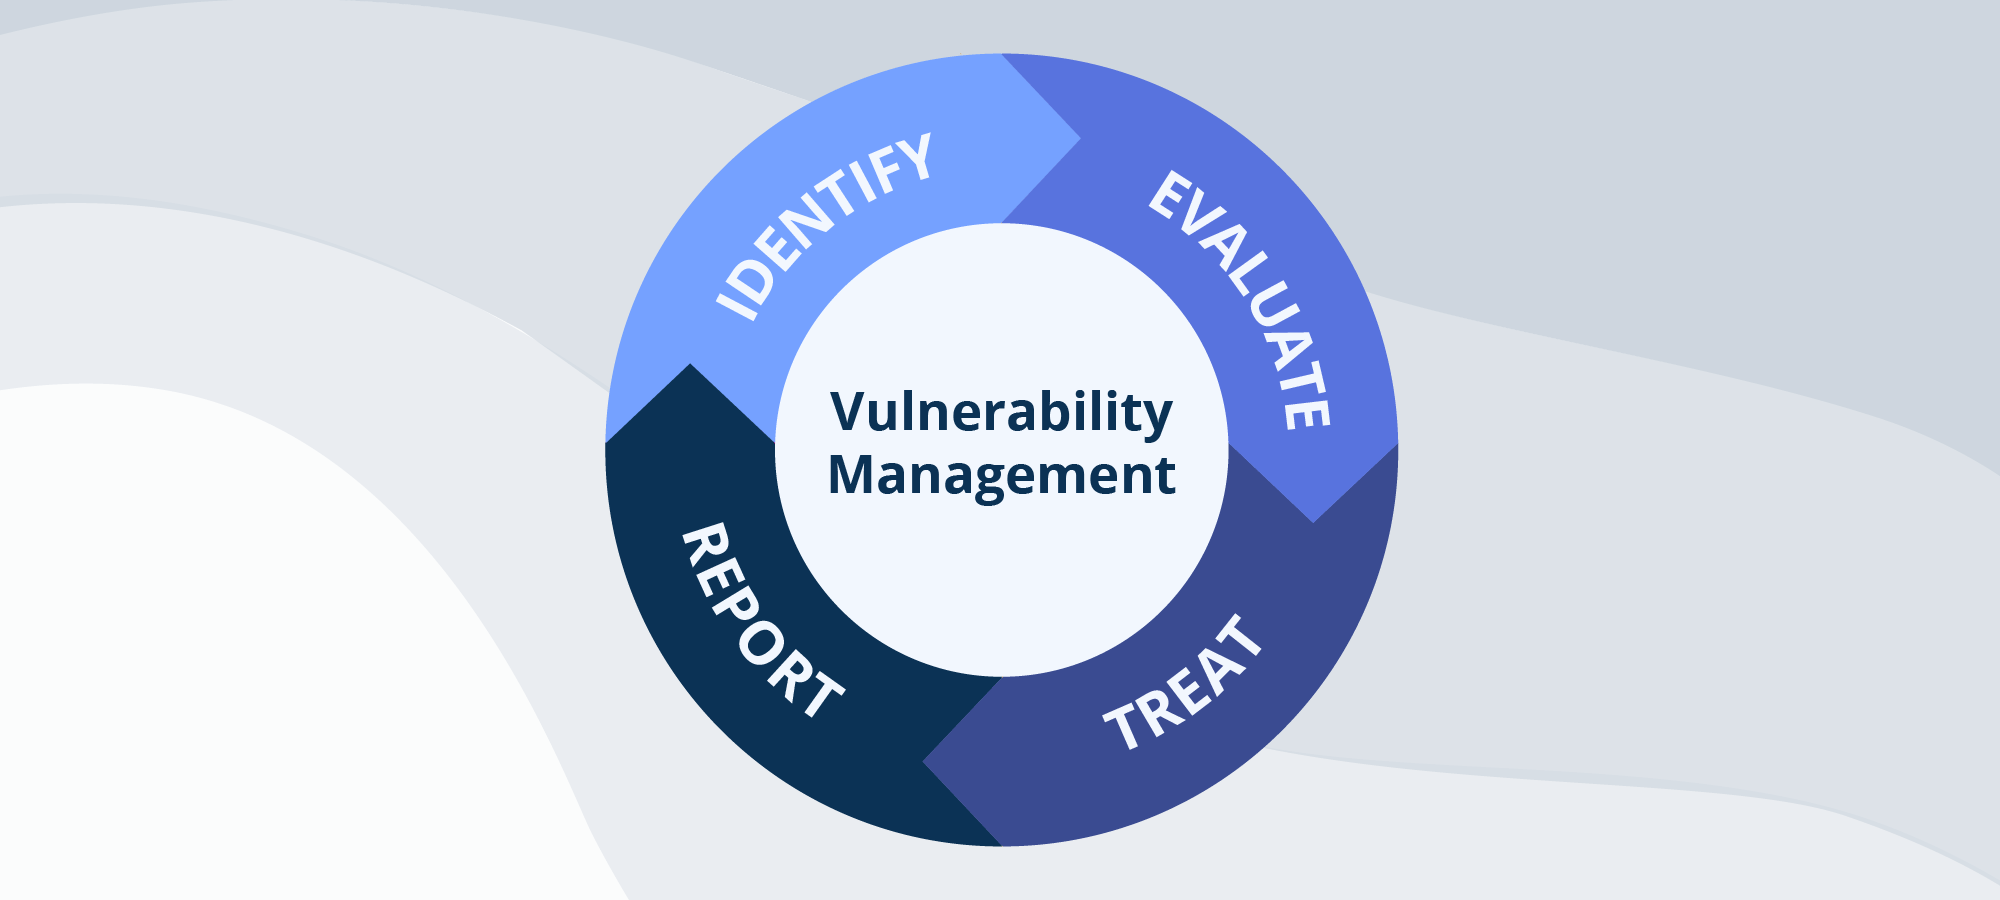 vulnerability management process cycle